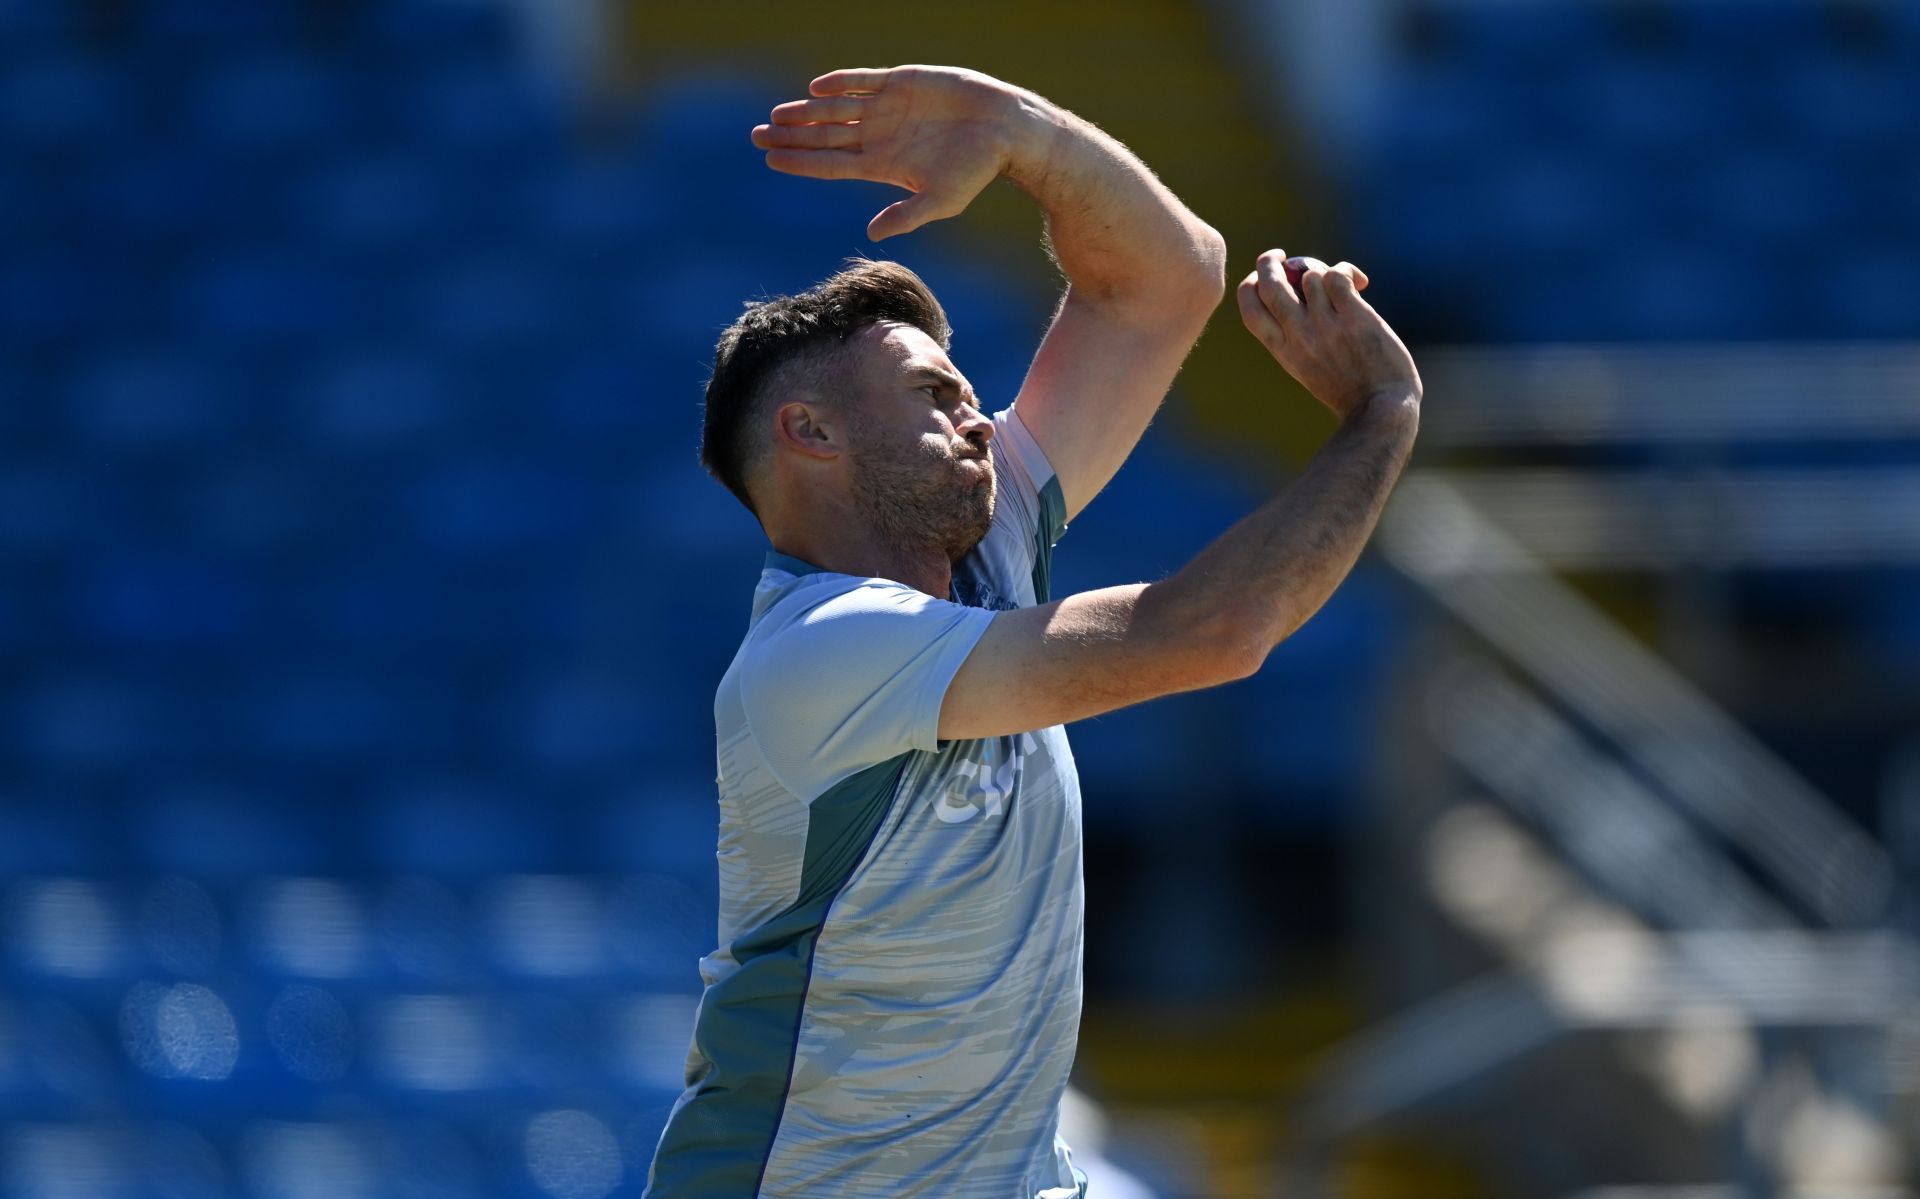 James Anderson played an integral role in the first two Tests. (Image Credits: Getty)